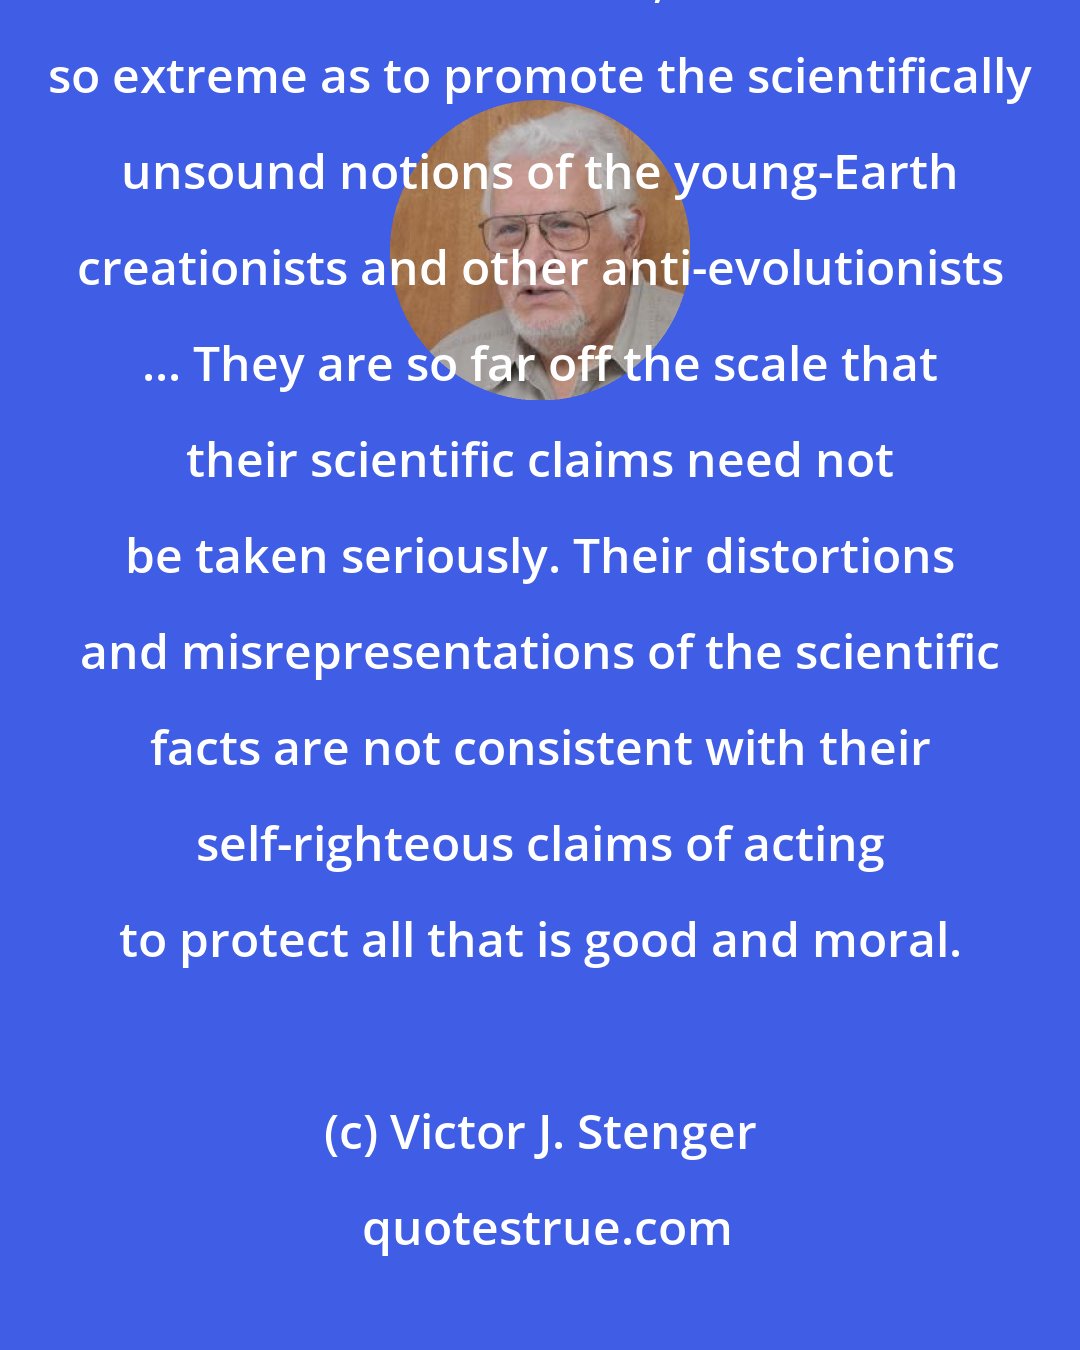 Victor J. Stenger: I have characterized Ross as exemplifying an extreme position among theistic scientists. However, he is not so extreme as to promote the scientifically unsound notions of the young-Earth creationists and other anti-evolutionists ... They are so far off the scale that their scientific claims need not be taken seriously. Their distortions and misrepresentations of the scientific facts are not consistent with their self-righteous claims of acting to protect all that is good and moral.